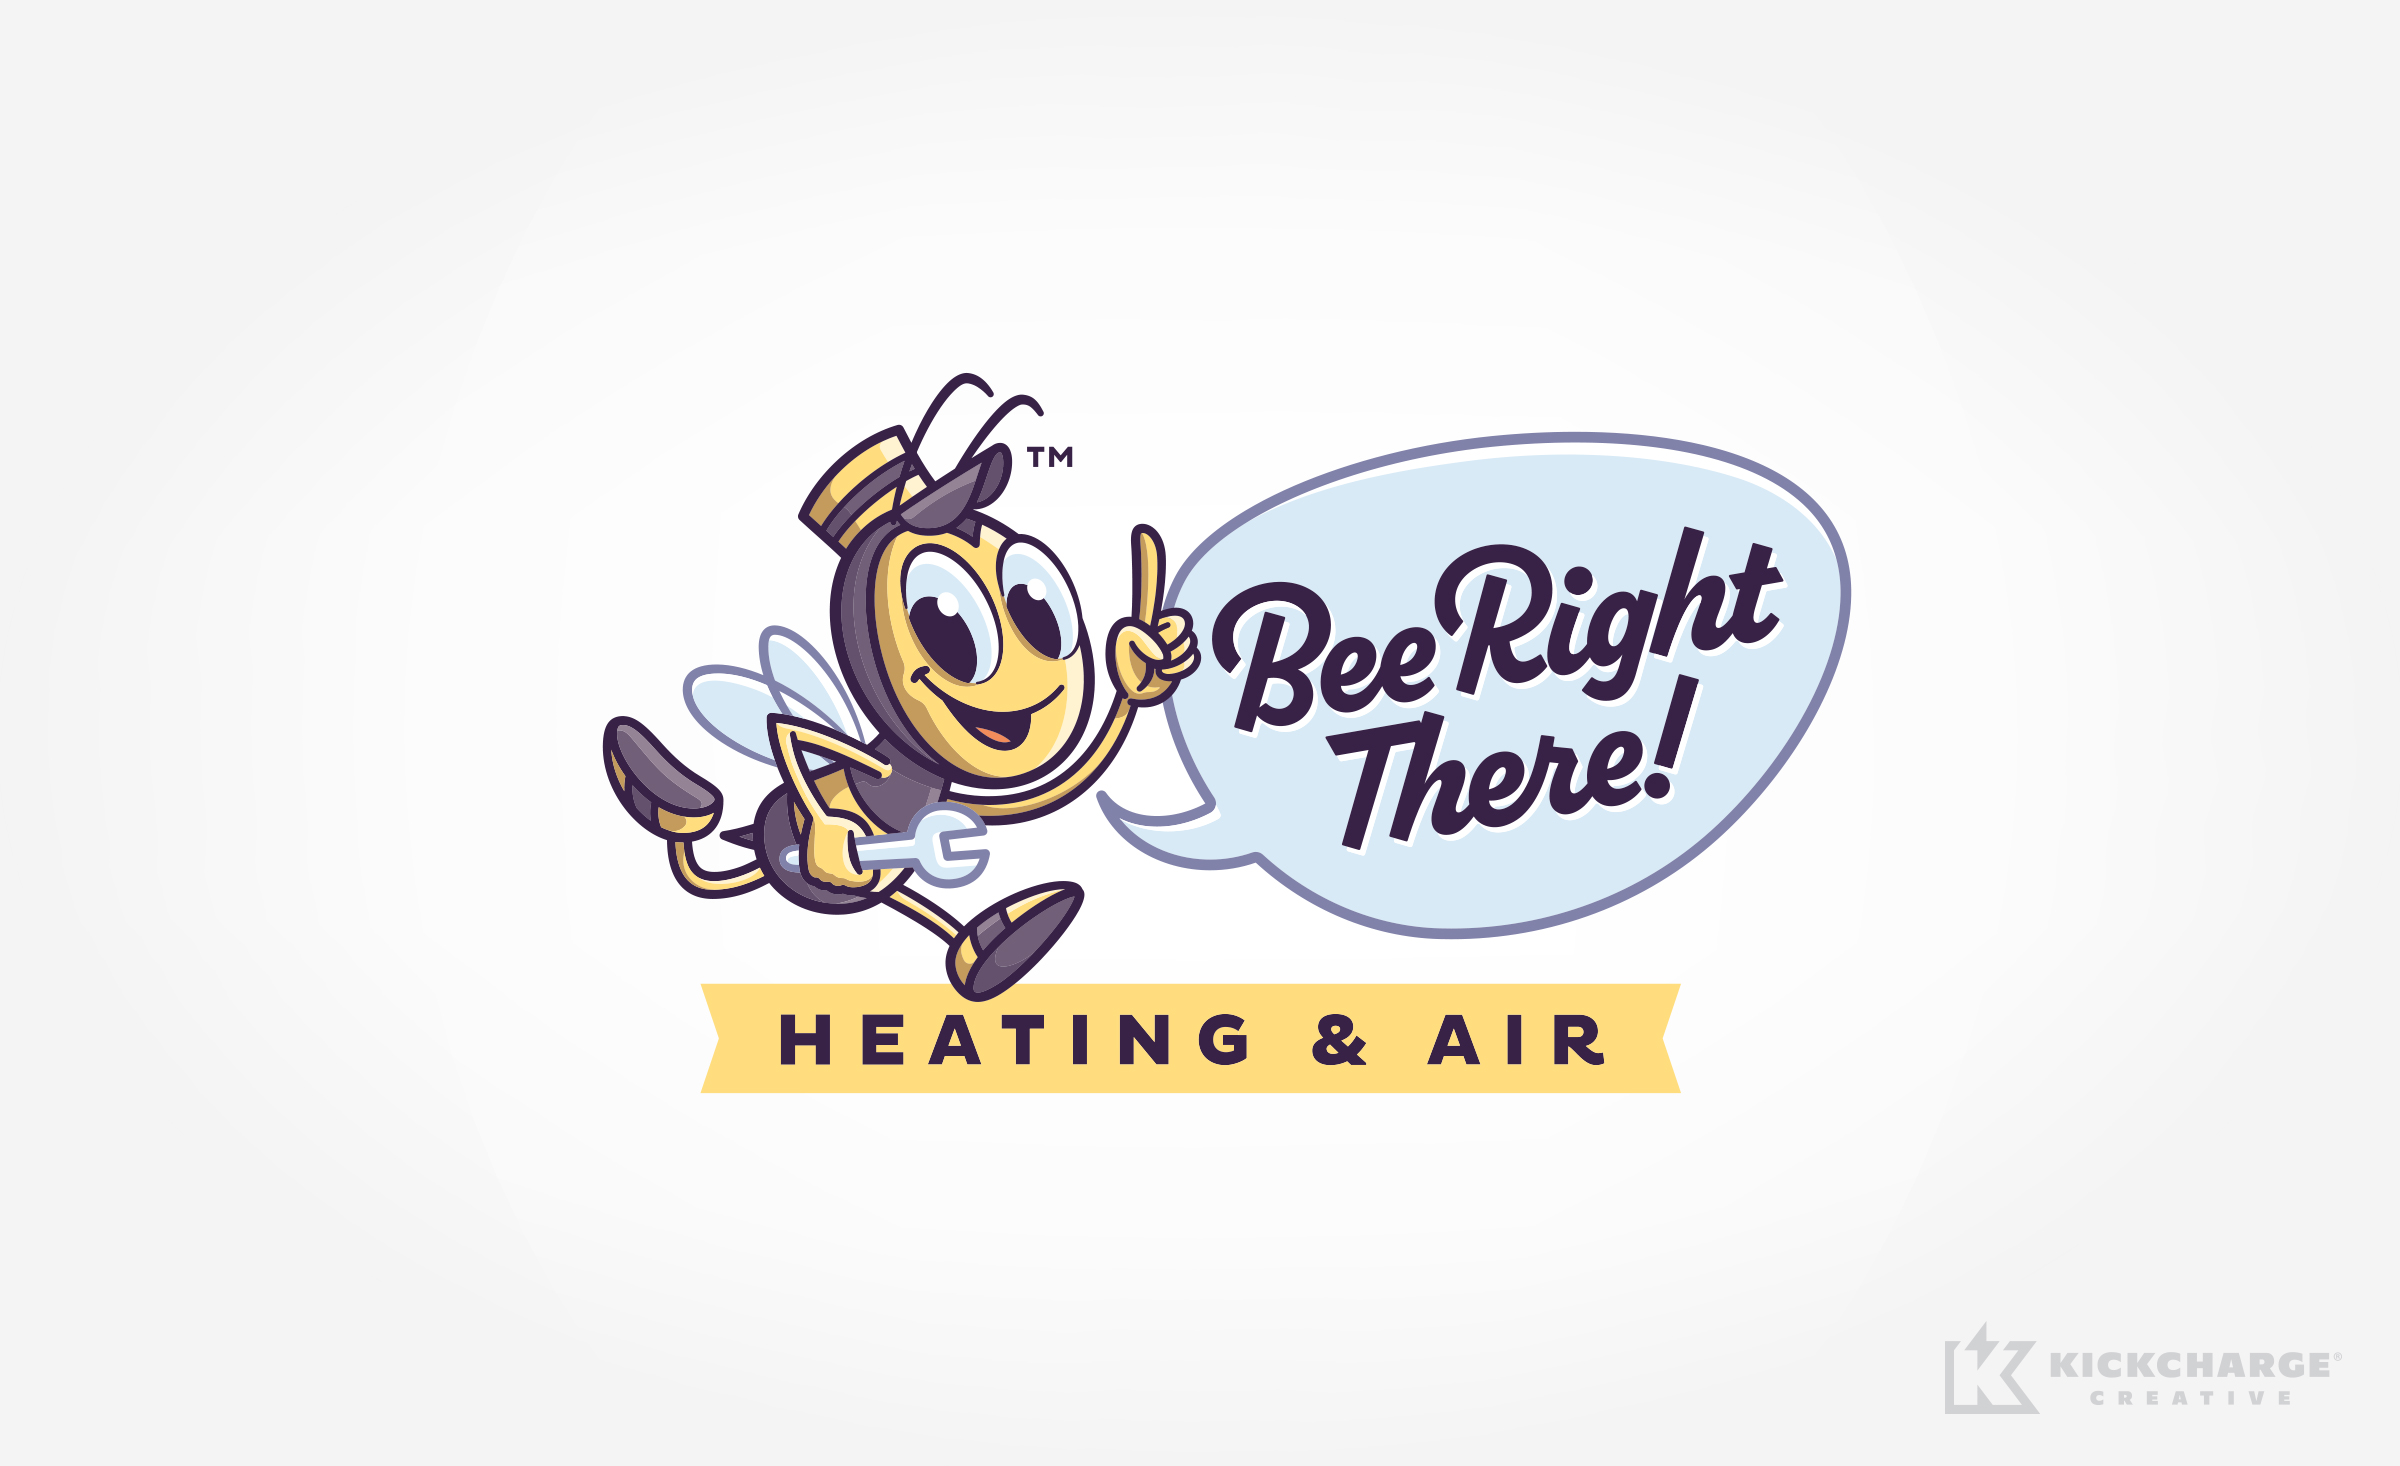 hvac logo for Bee Right There!